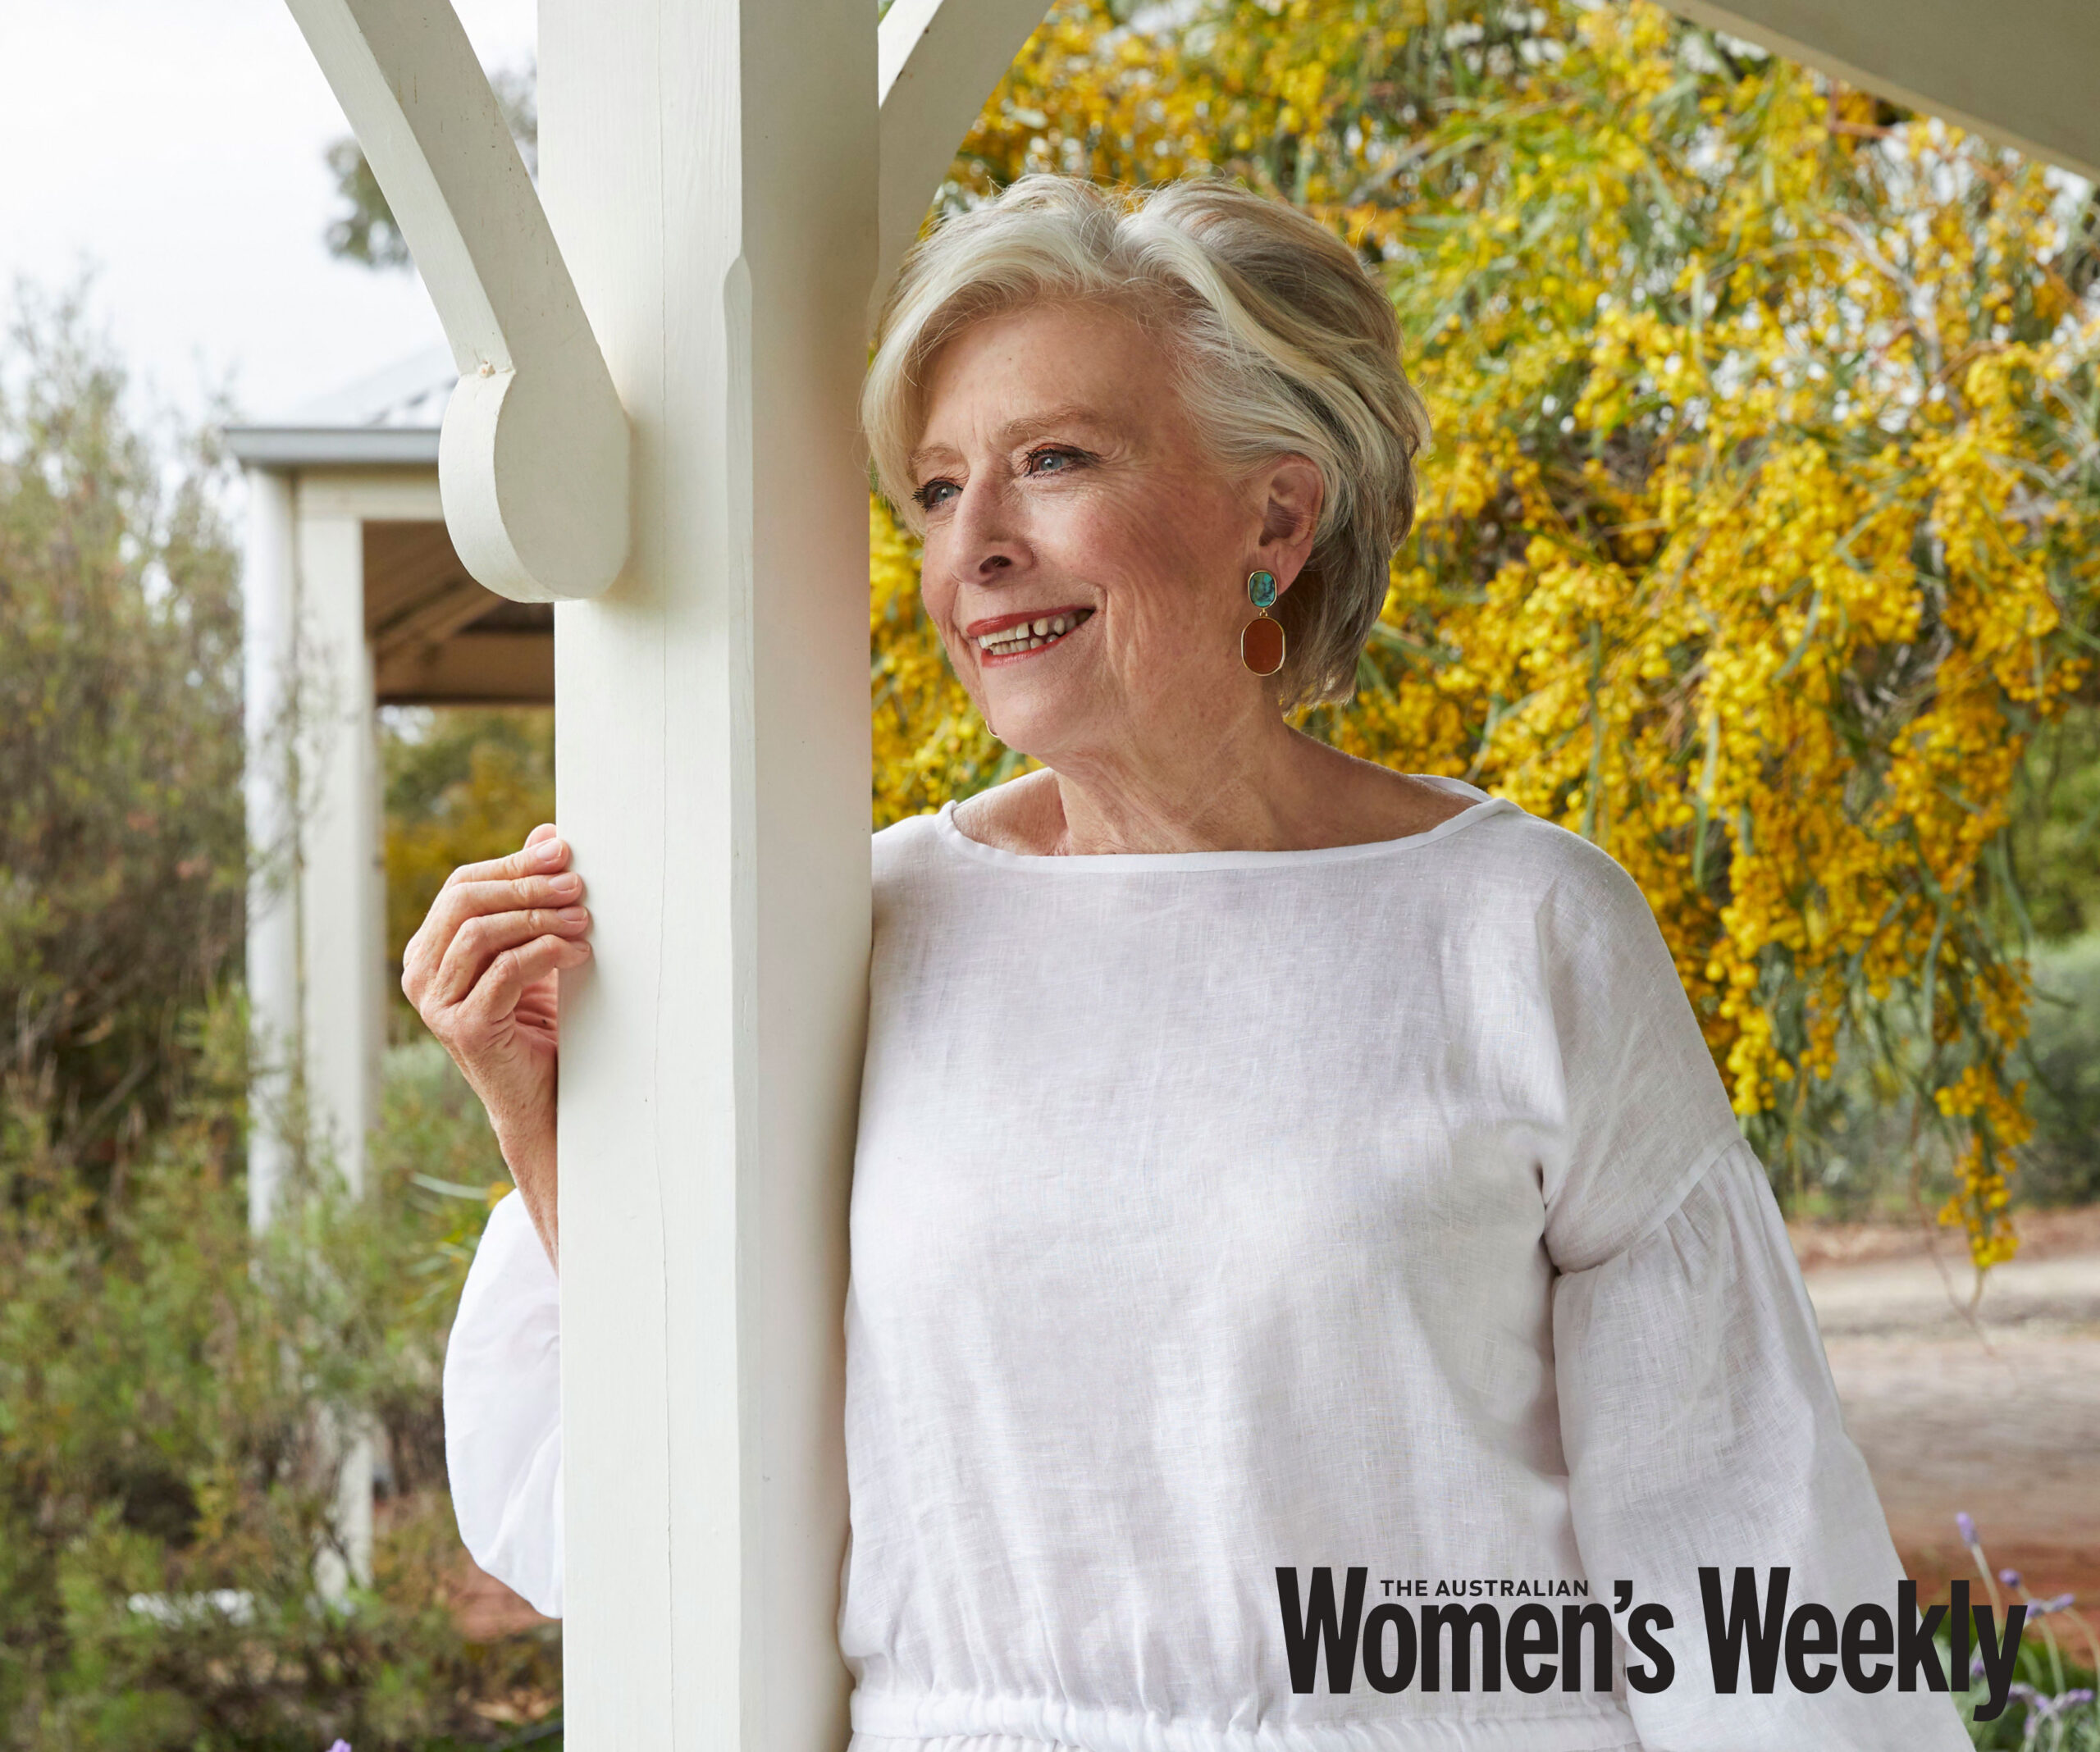 EXCLUSIVE: She’s known for her passion for food and joy for life, but 2020 has been heartbreaking for Maggie Beer